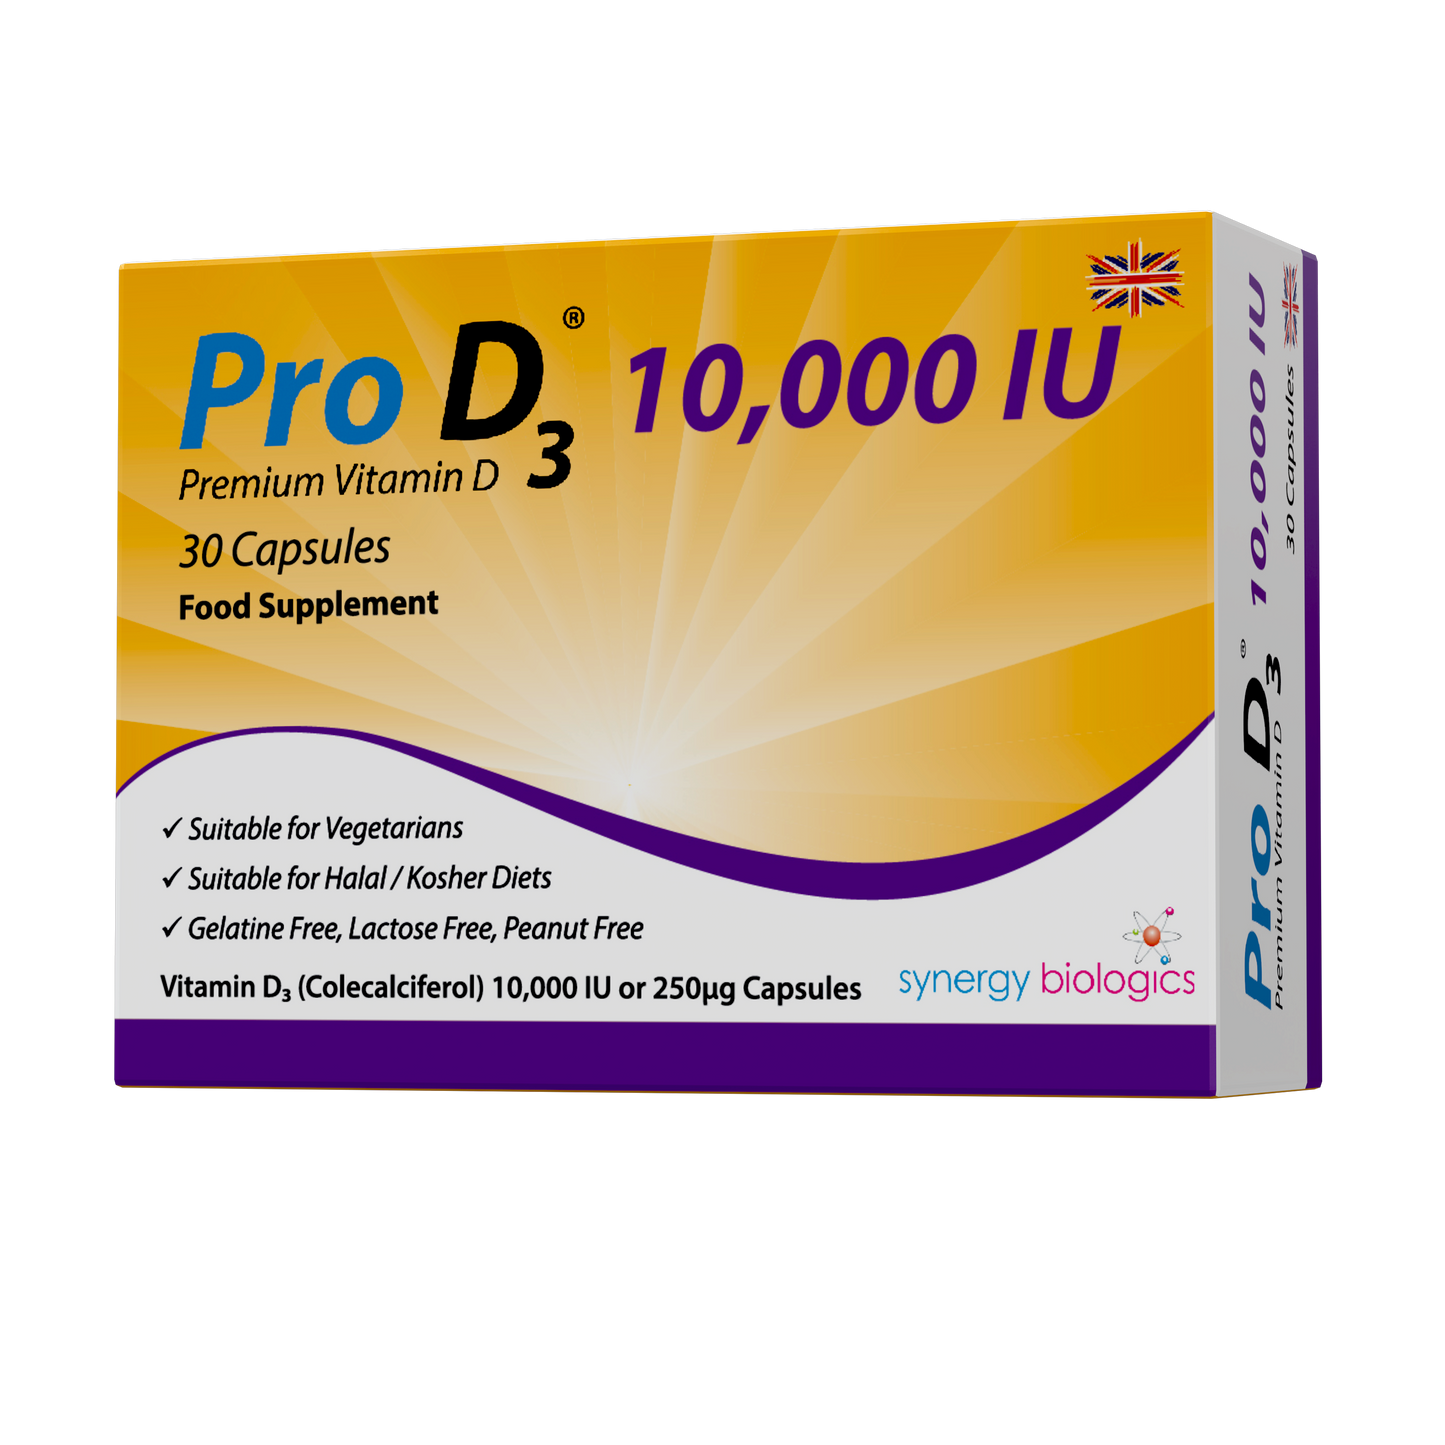 Pro D3 10,000 IU Weekly Vitamin D3 Capsules - High-Potency UK Supplements for Immune Support and Wellbeing